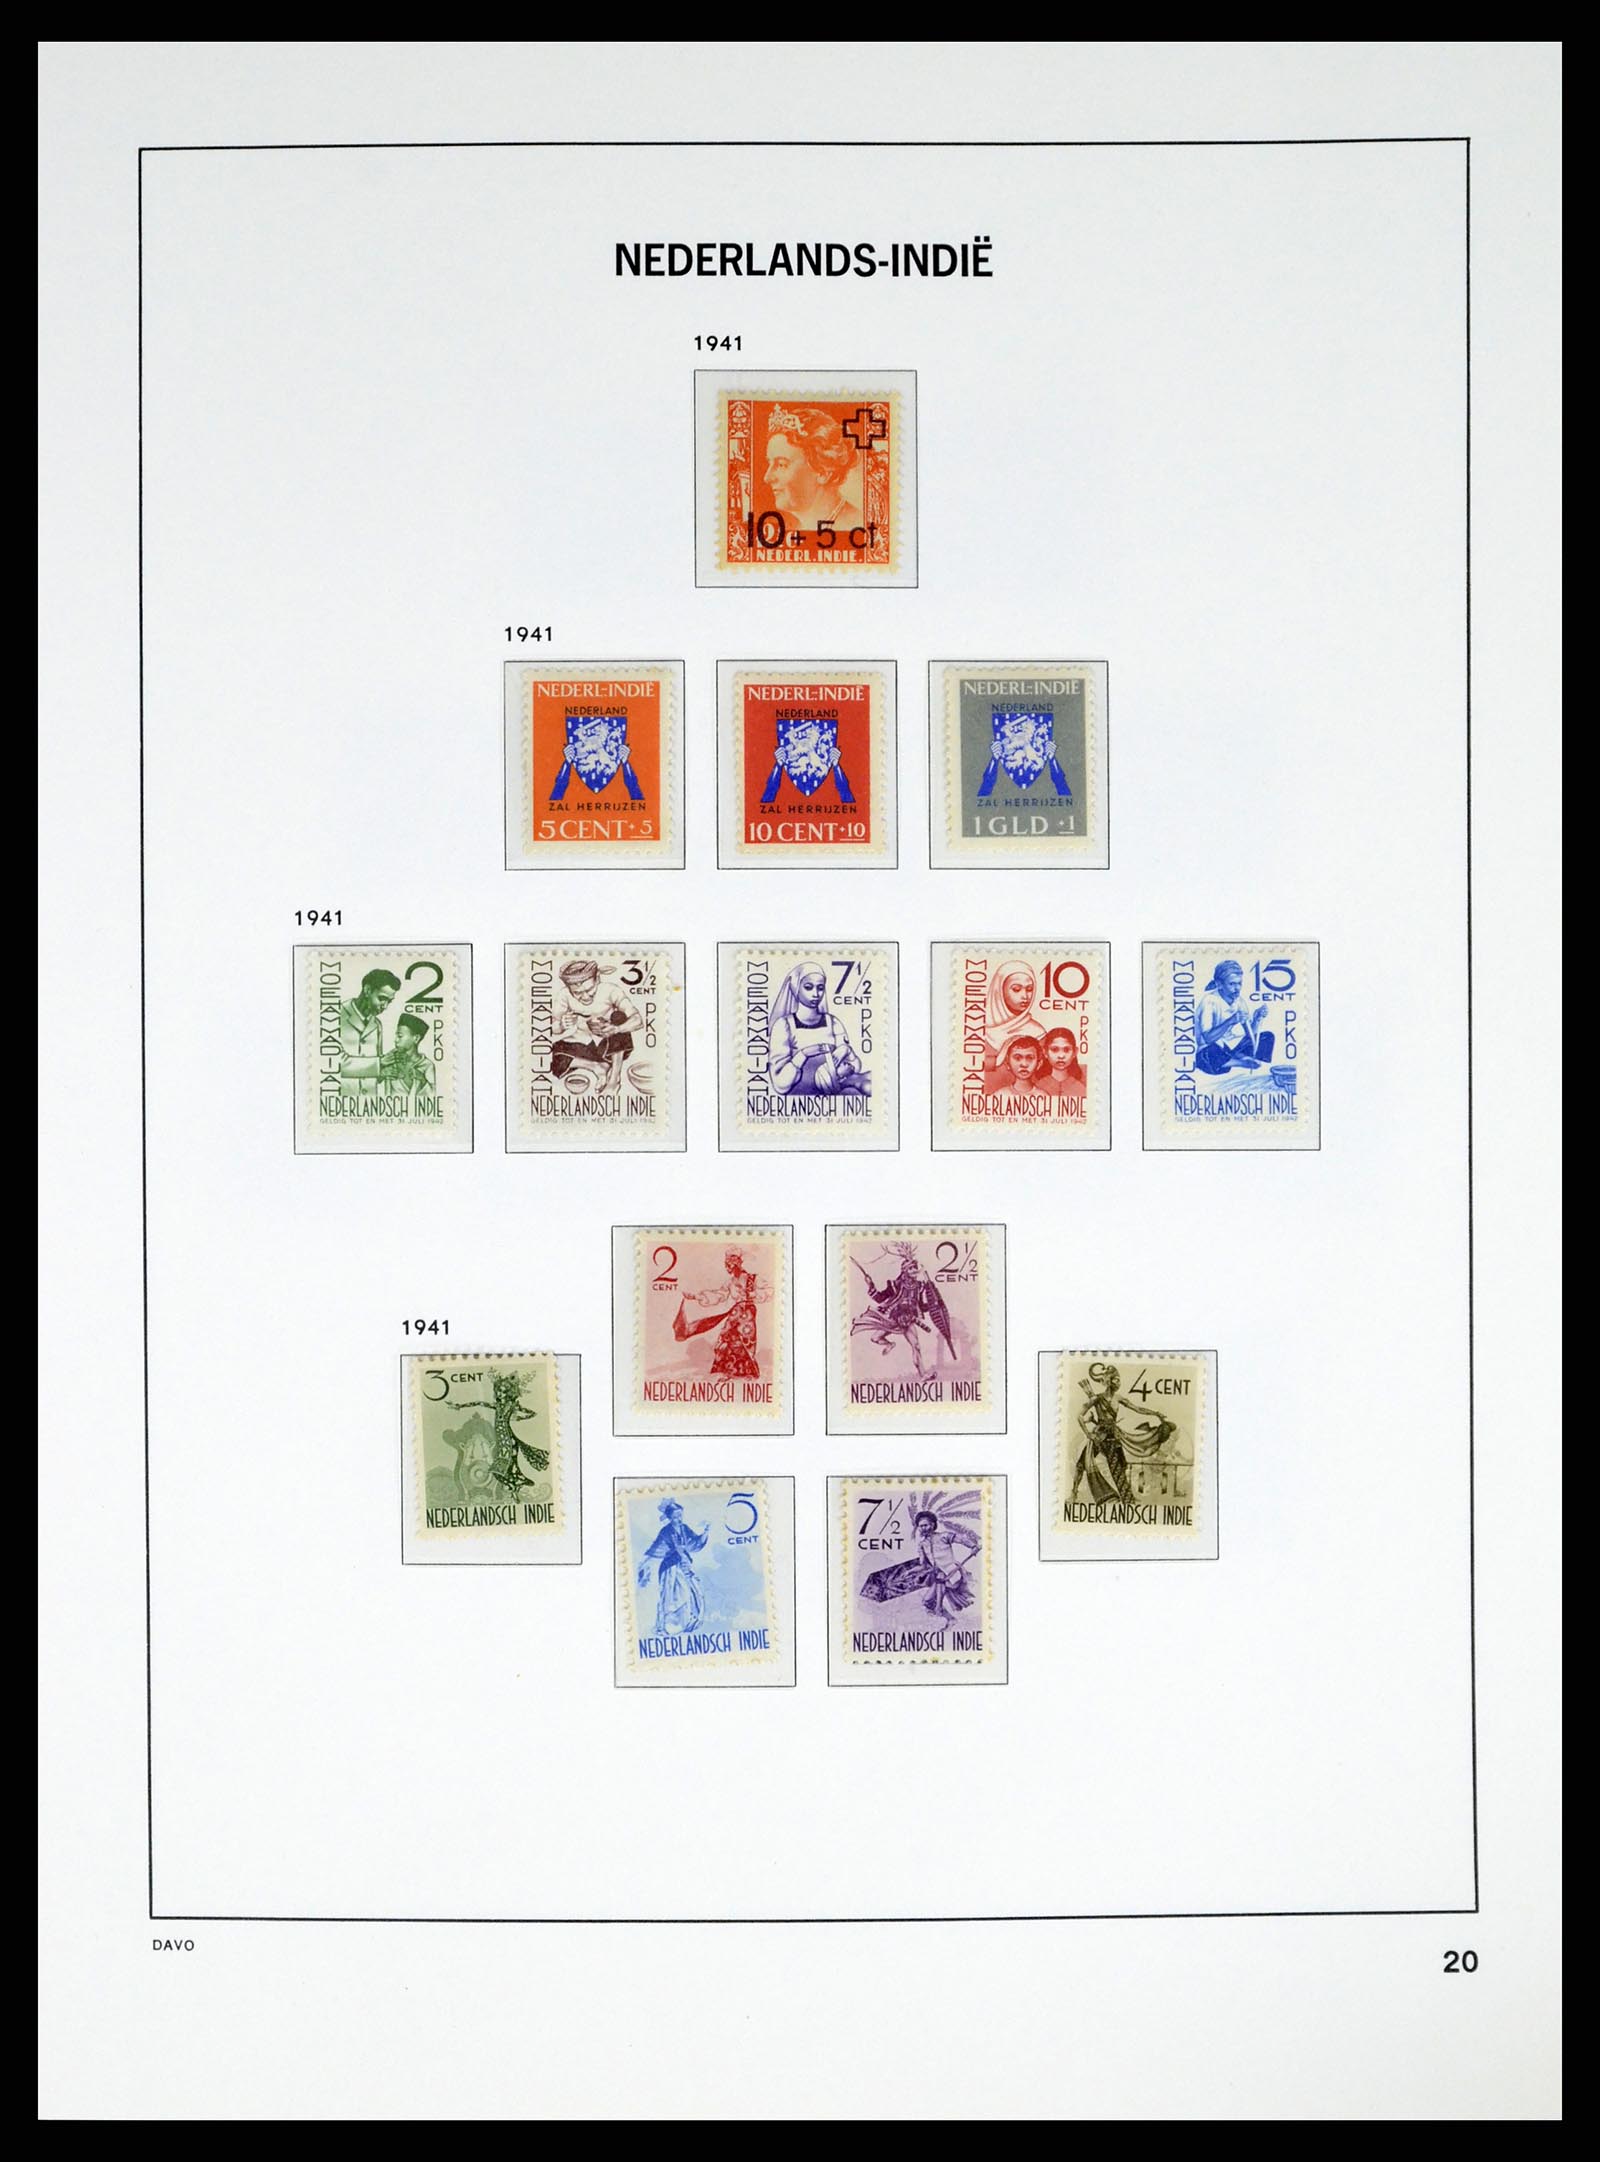 37332 020 - Stamp collection 37332 Dutch East Indies 1864-1949.